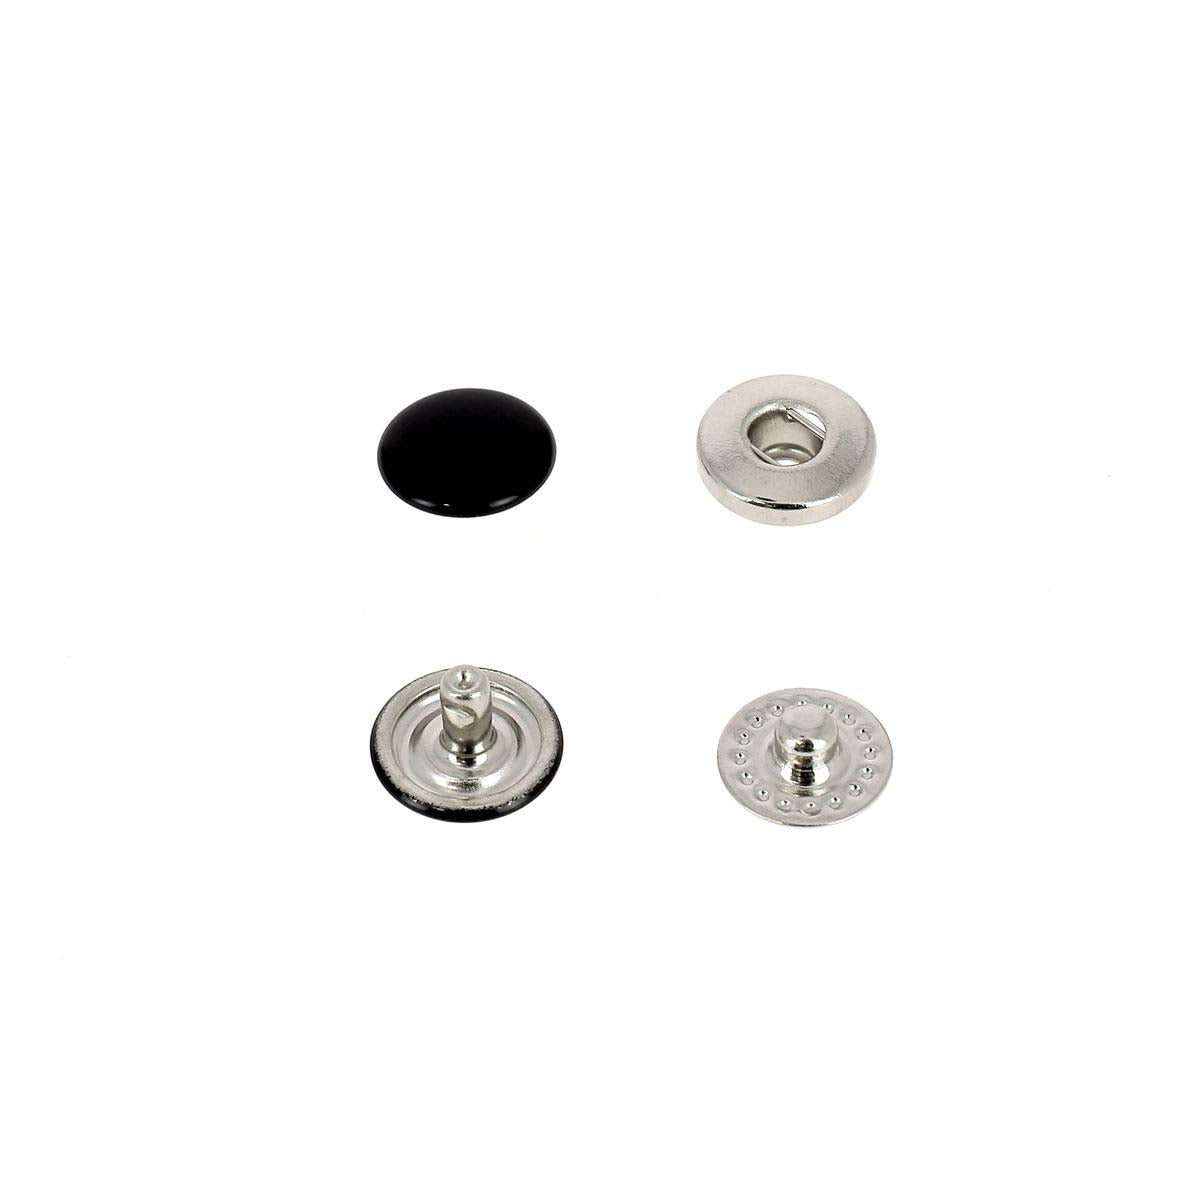 Boutons pressions 15 mm + outillage col. Nickel - Couture loisirs